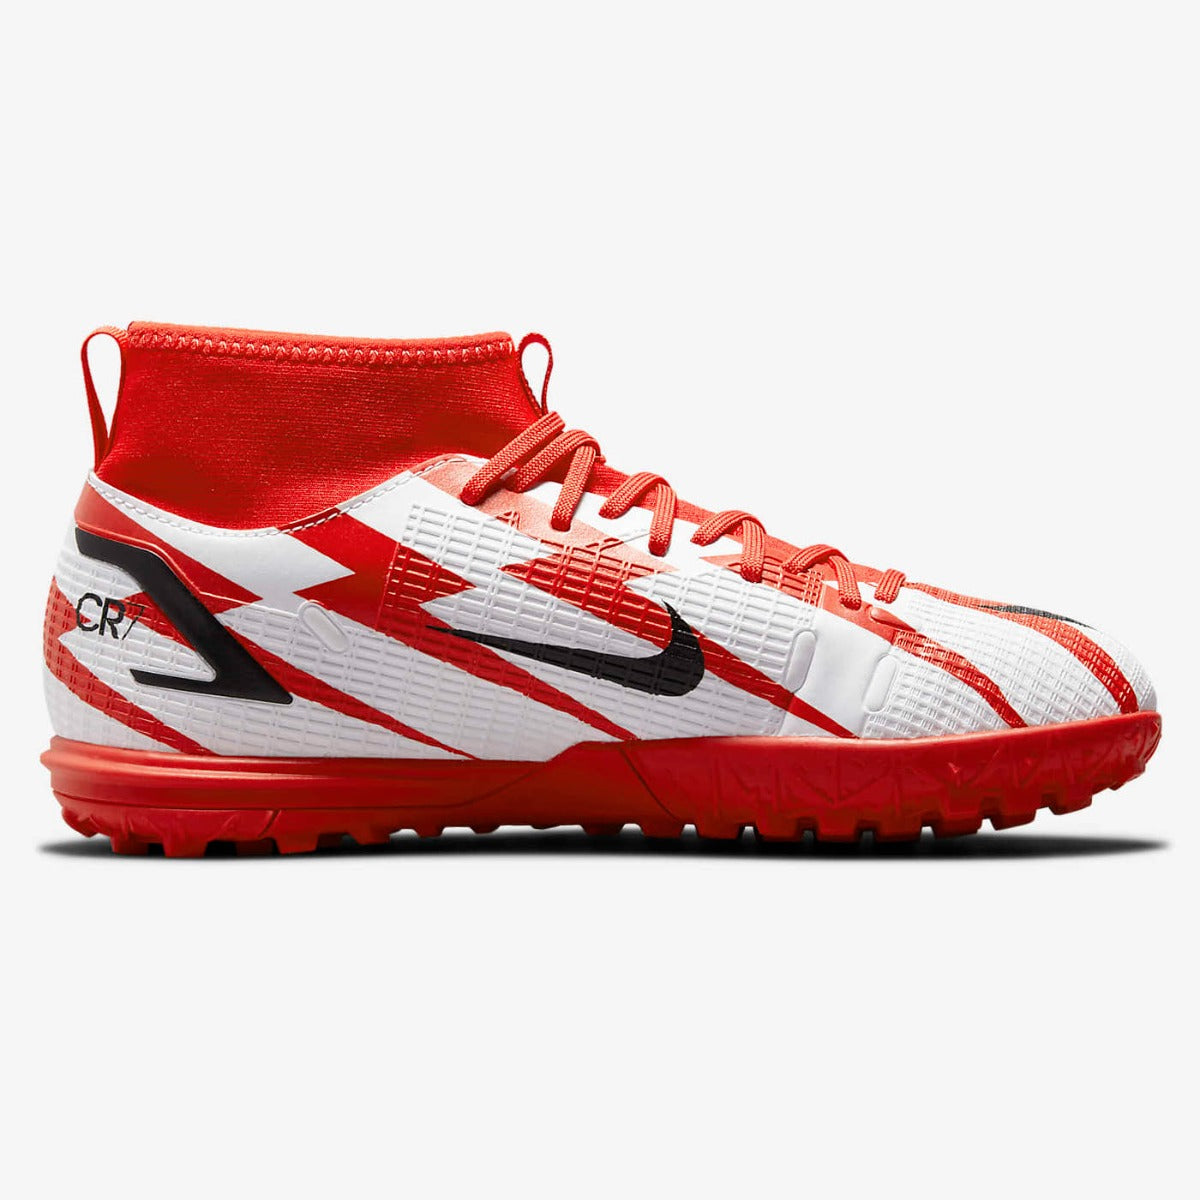 Nike JR Superfly 8 Academy CR7 TF - Red-White (Side 2)